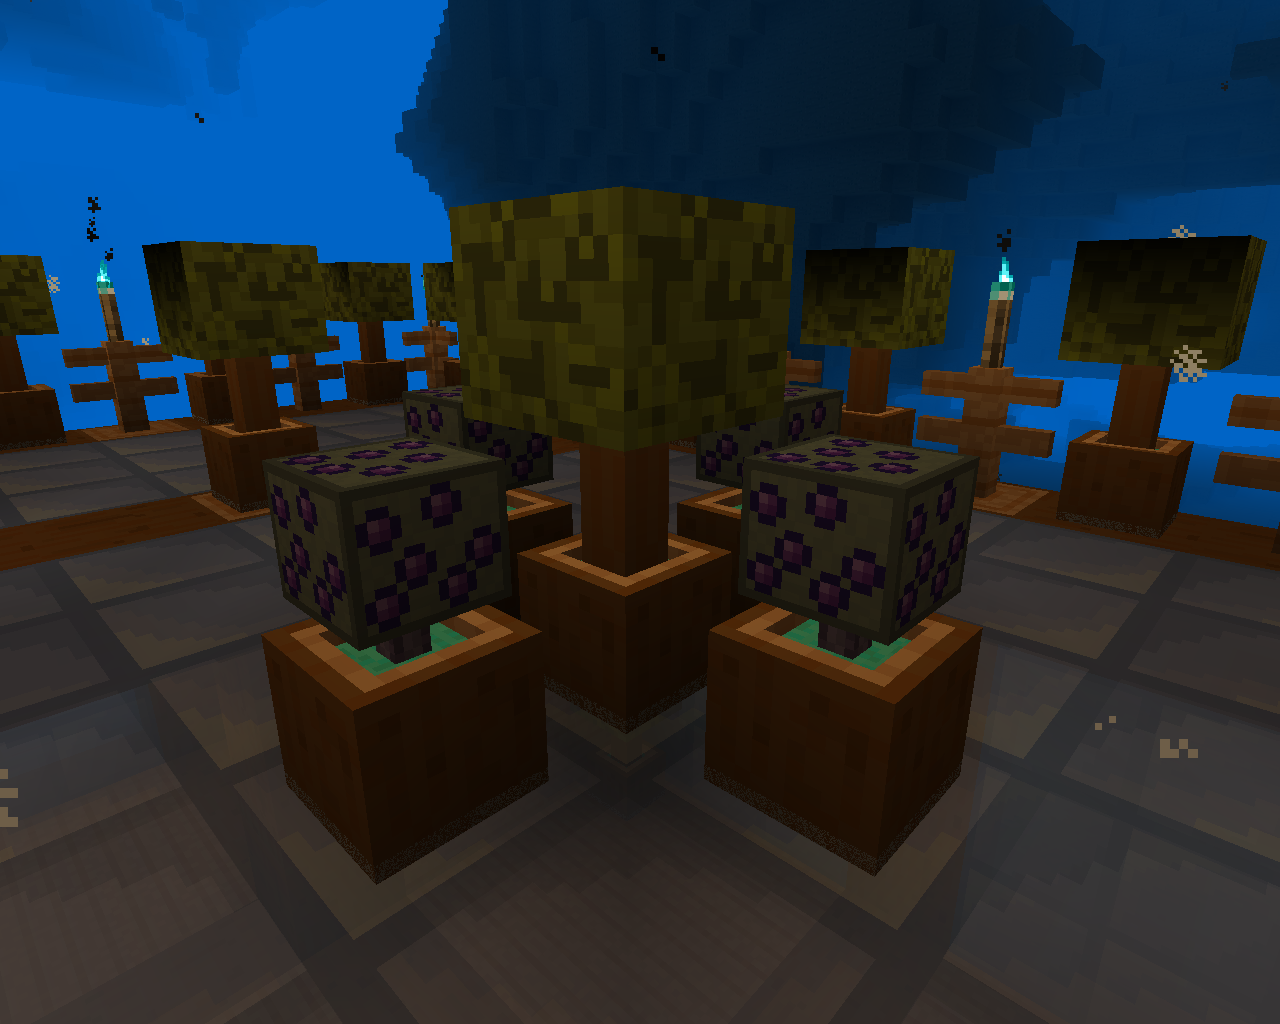 Pots with dwarf pine and blueberries (added in 1.4)